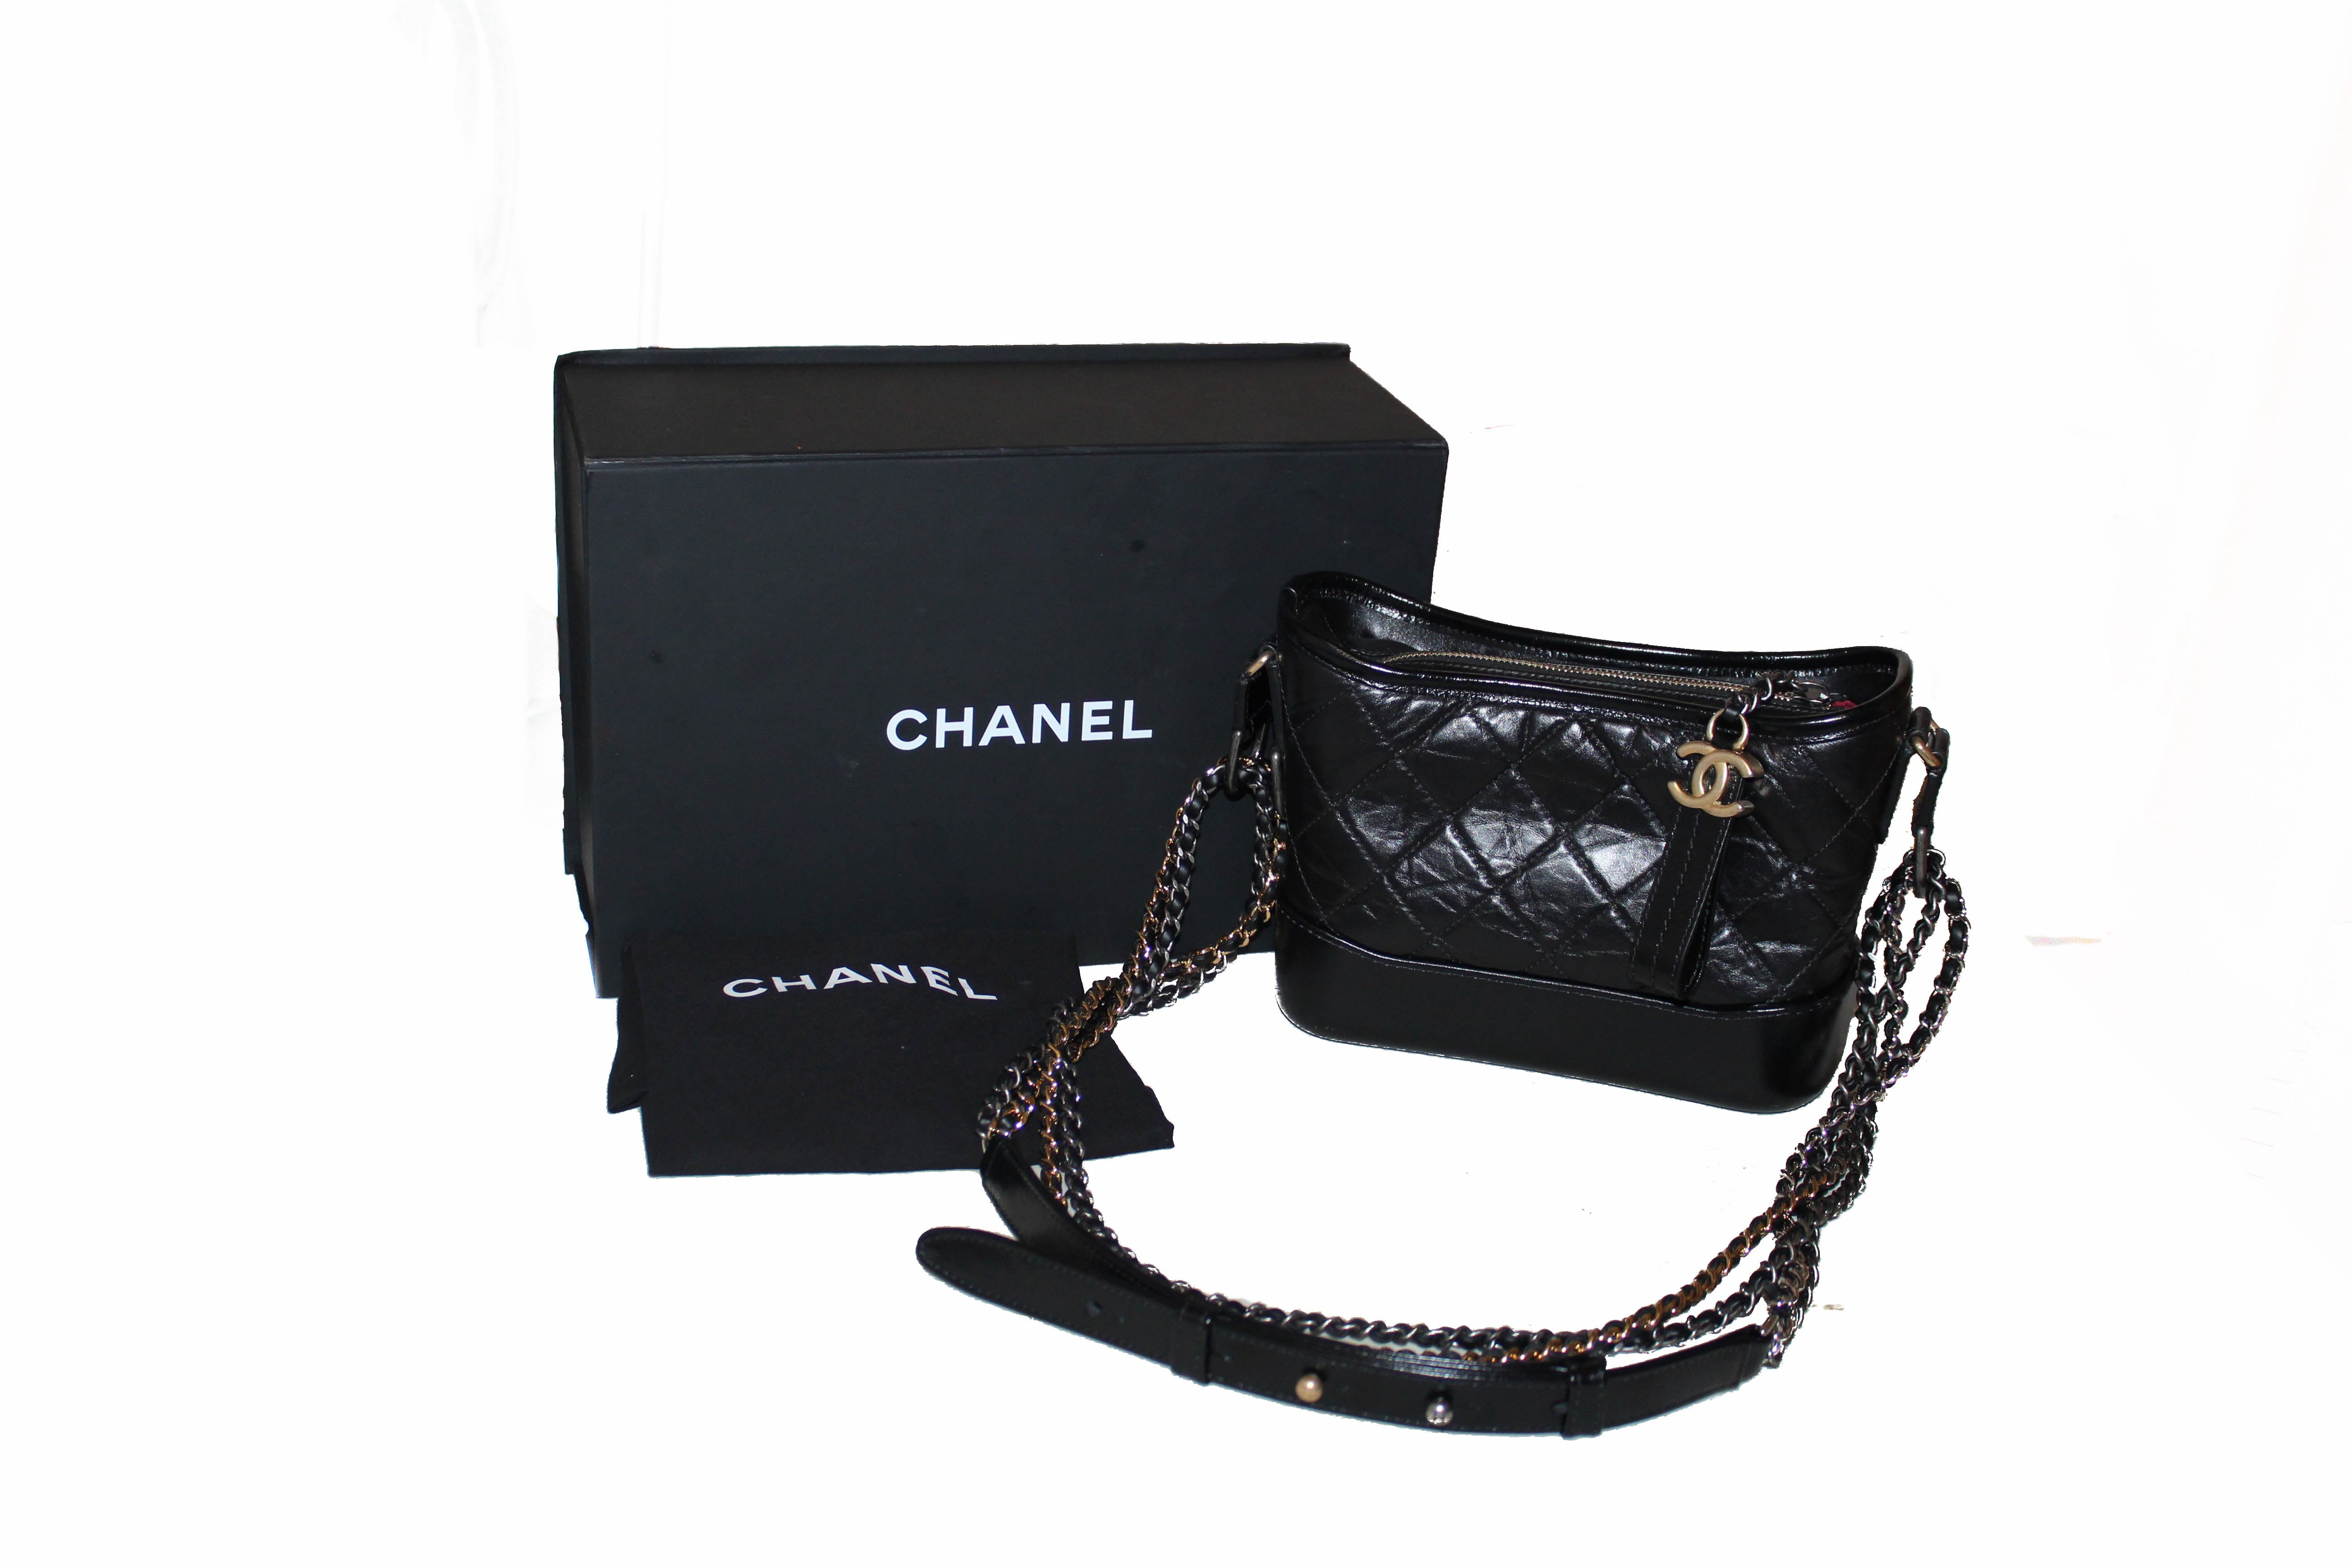 Authentic Chanel Gabrielle Black Calfskin Leather Small Hobo Shoulder Bag